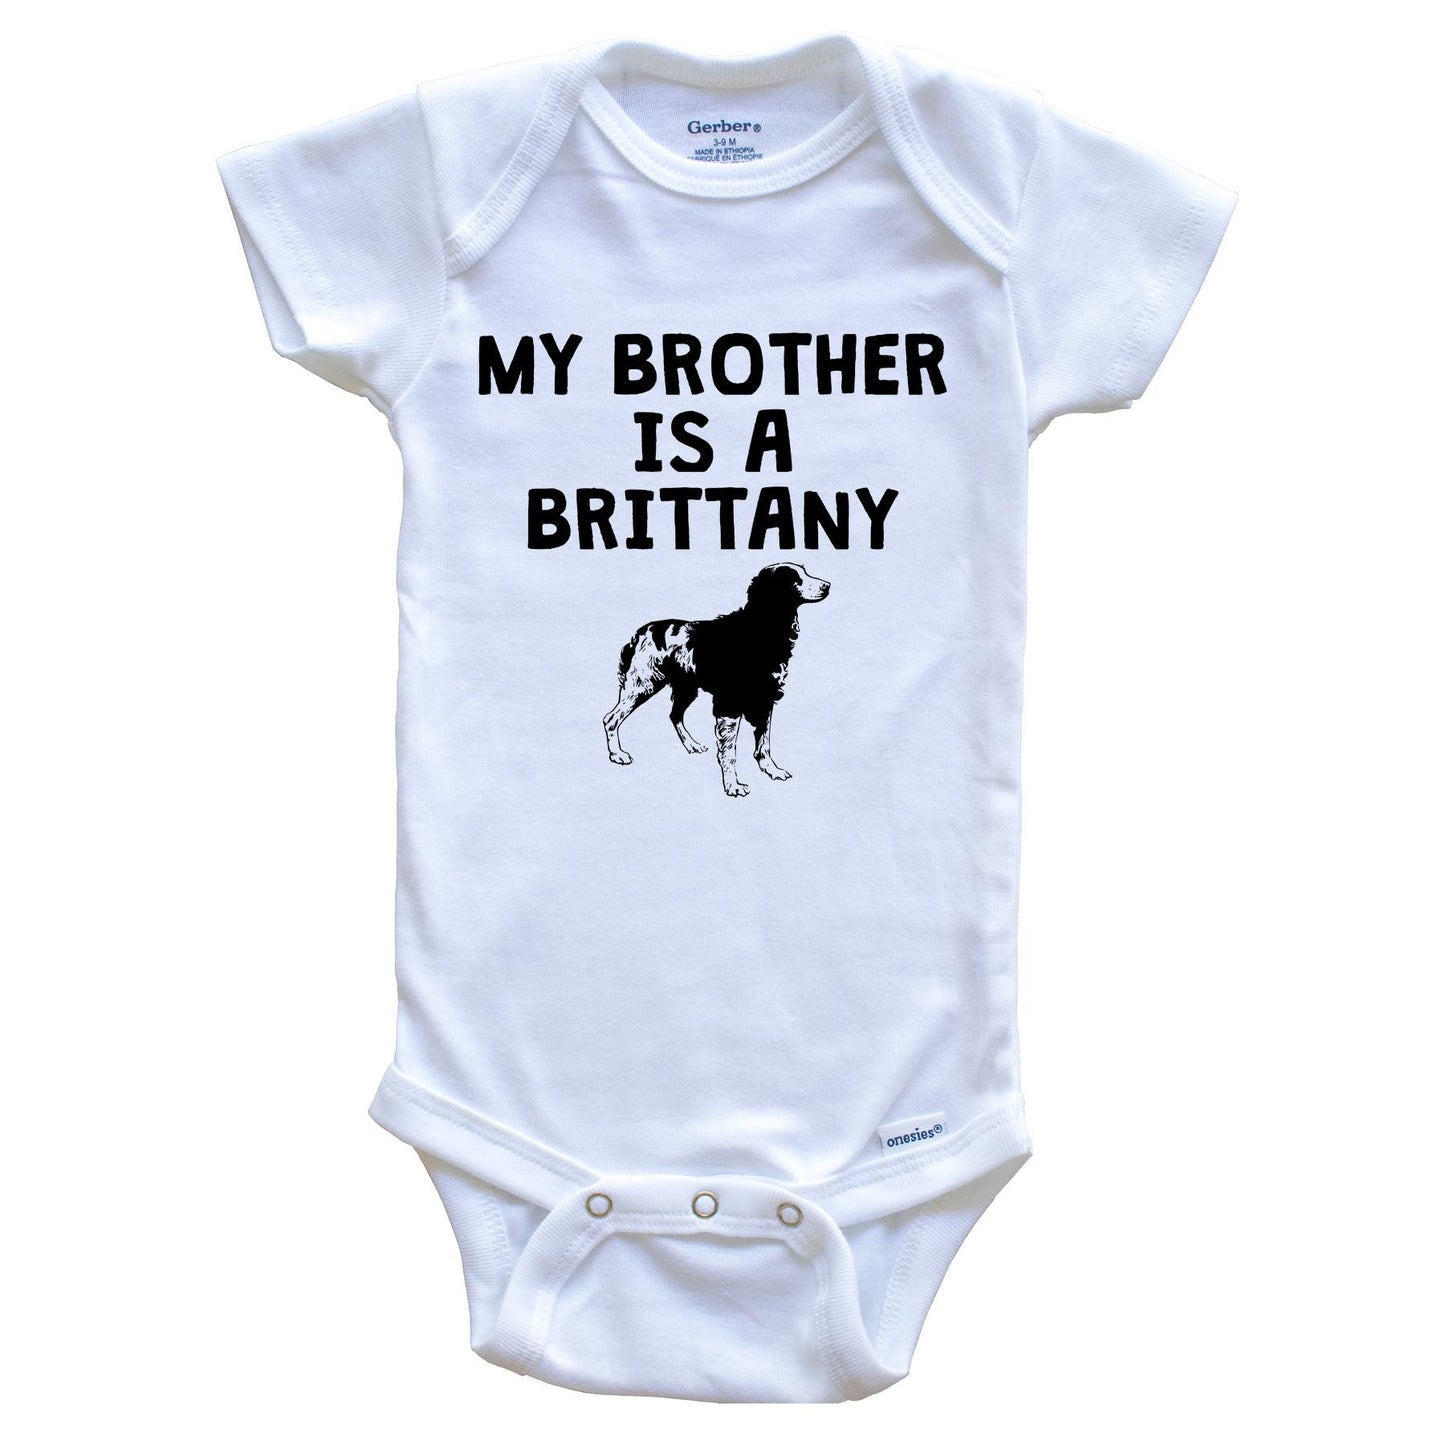 My Brother Is A Brittany Baby Onesie